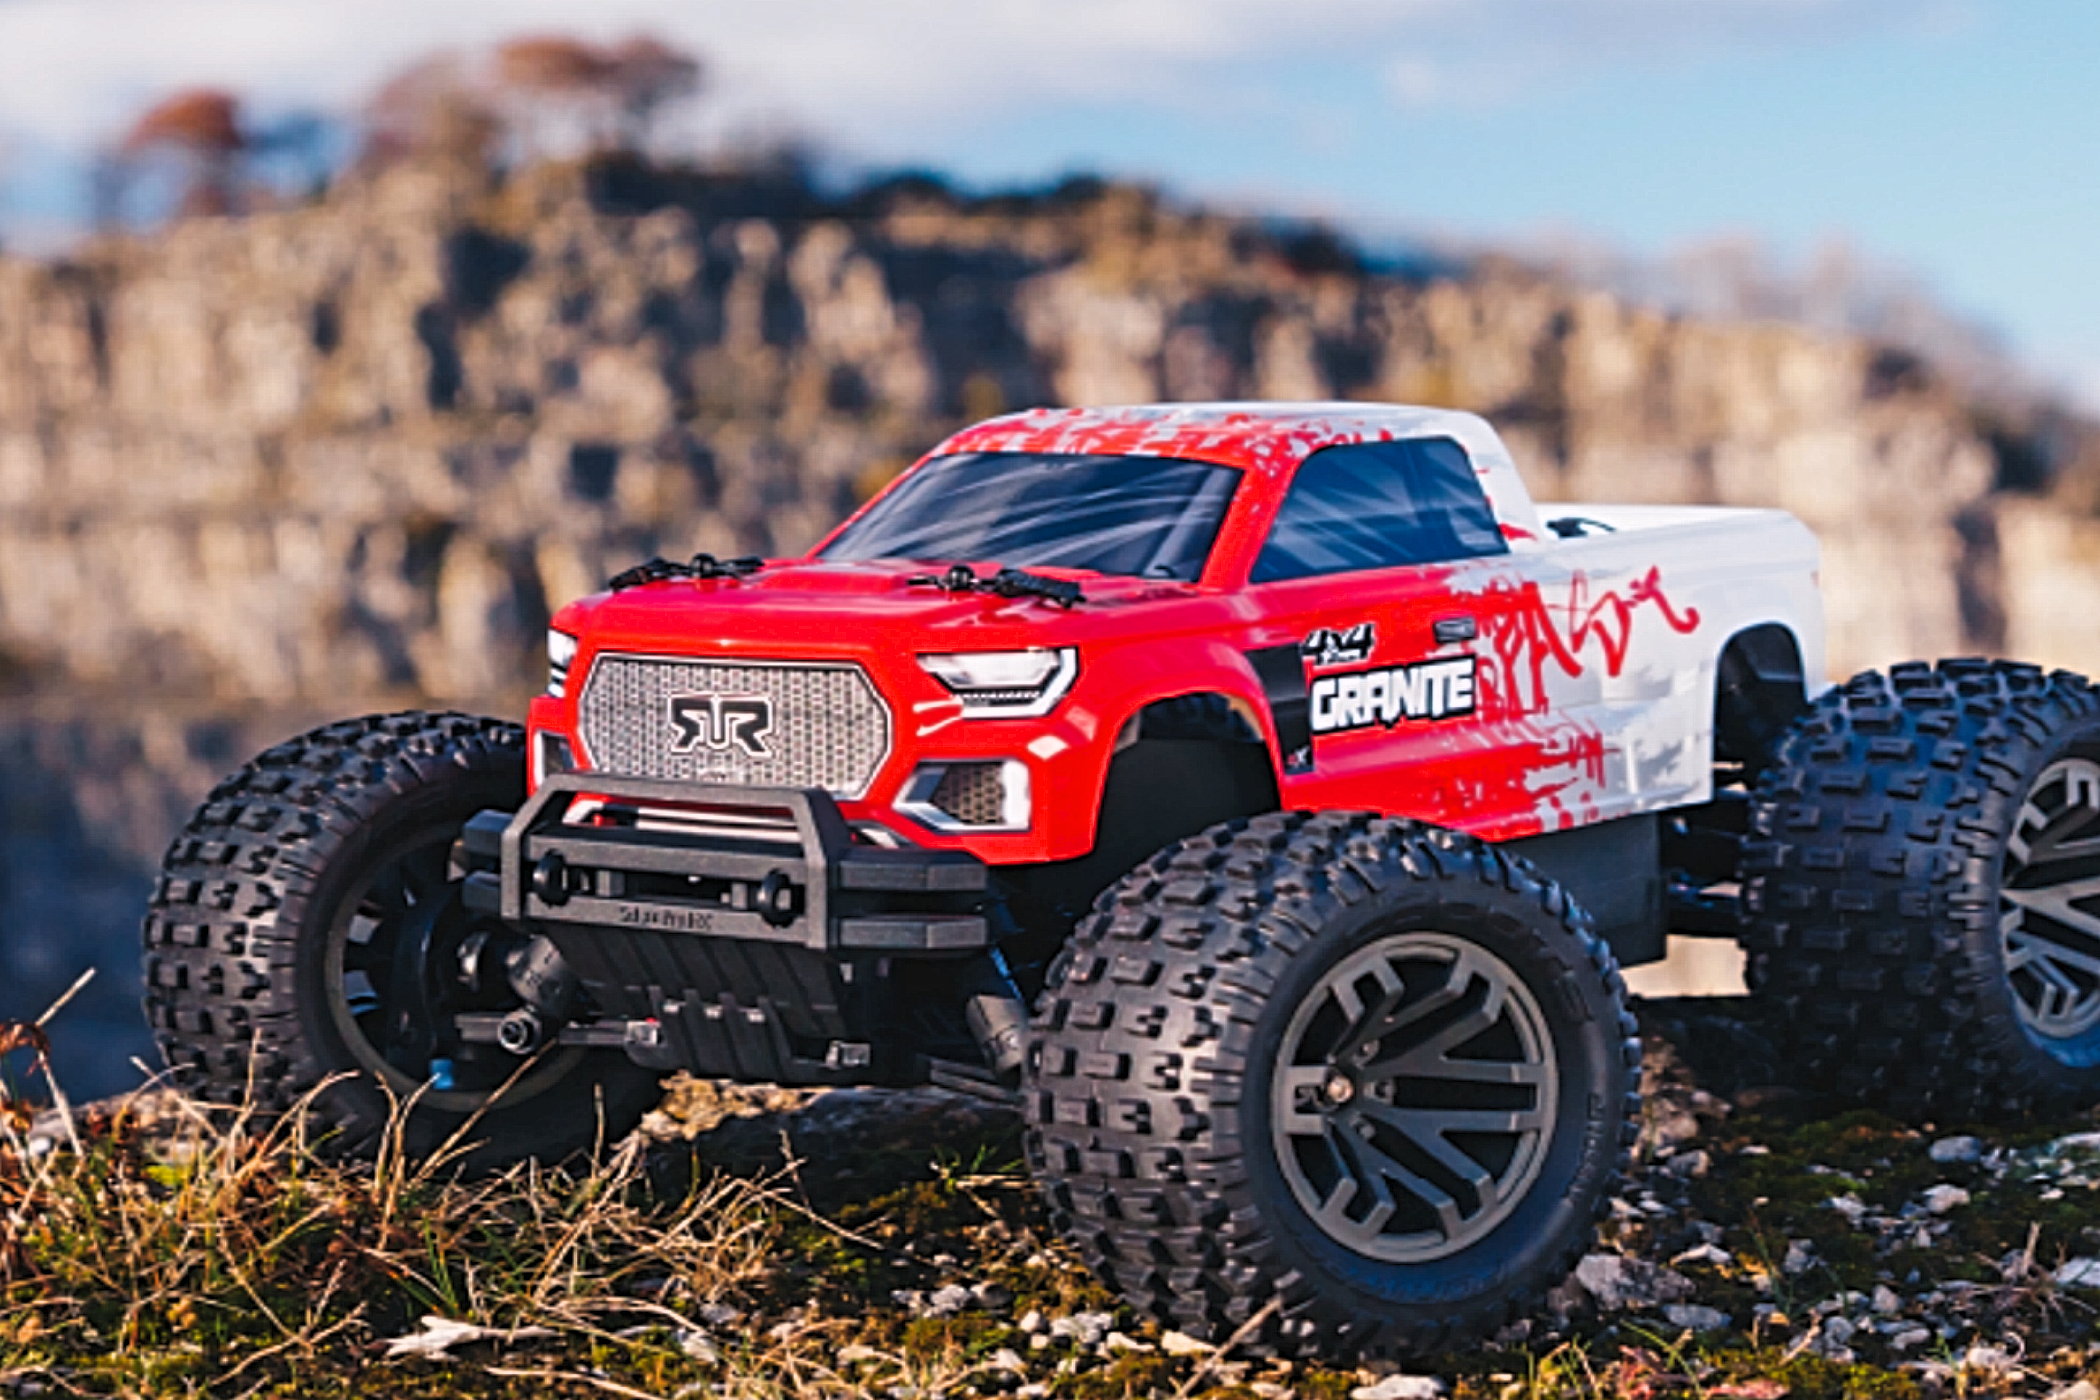 RC 1/10 Electric Off Road, Shop Fast and Tough RC Cars and Trucks from  ARRMA